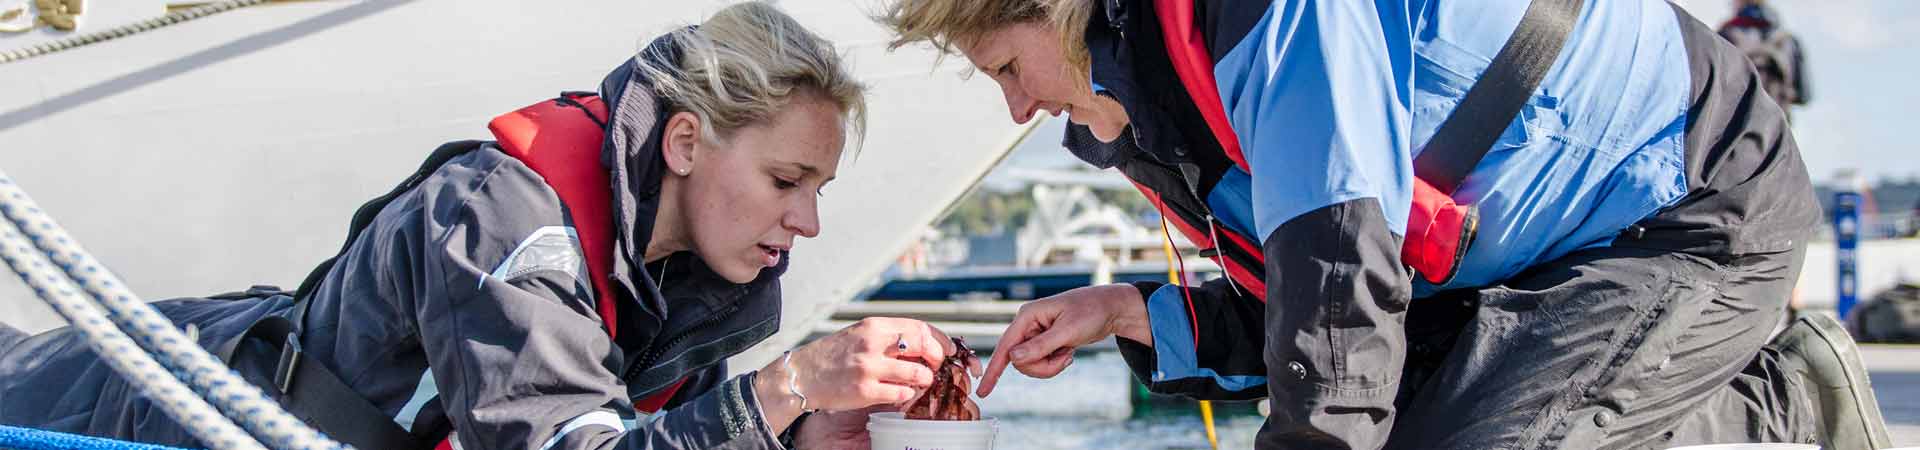 Image with two scientists in a marina looking at alien invasive species they sampled